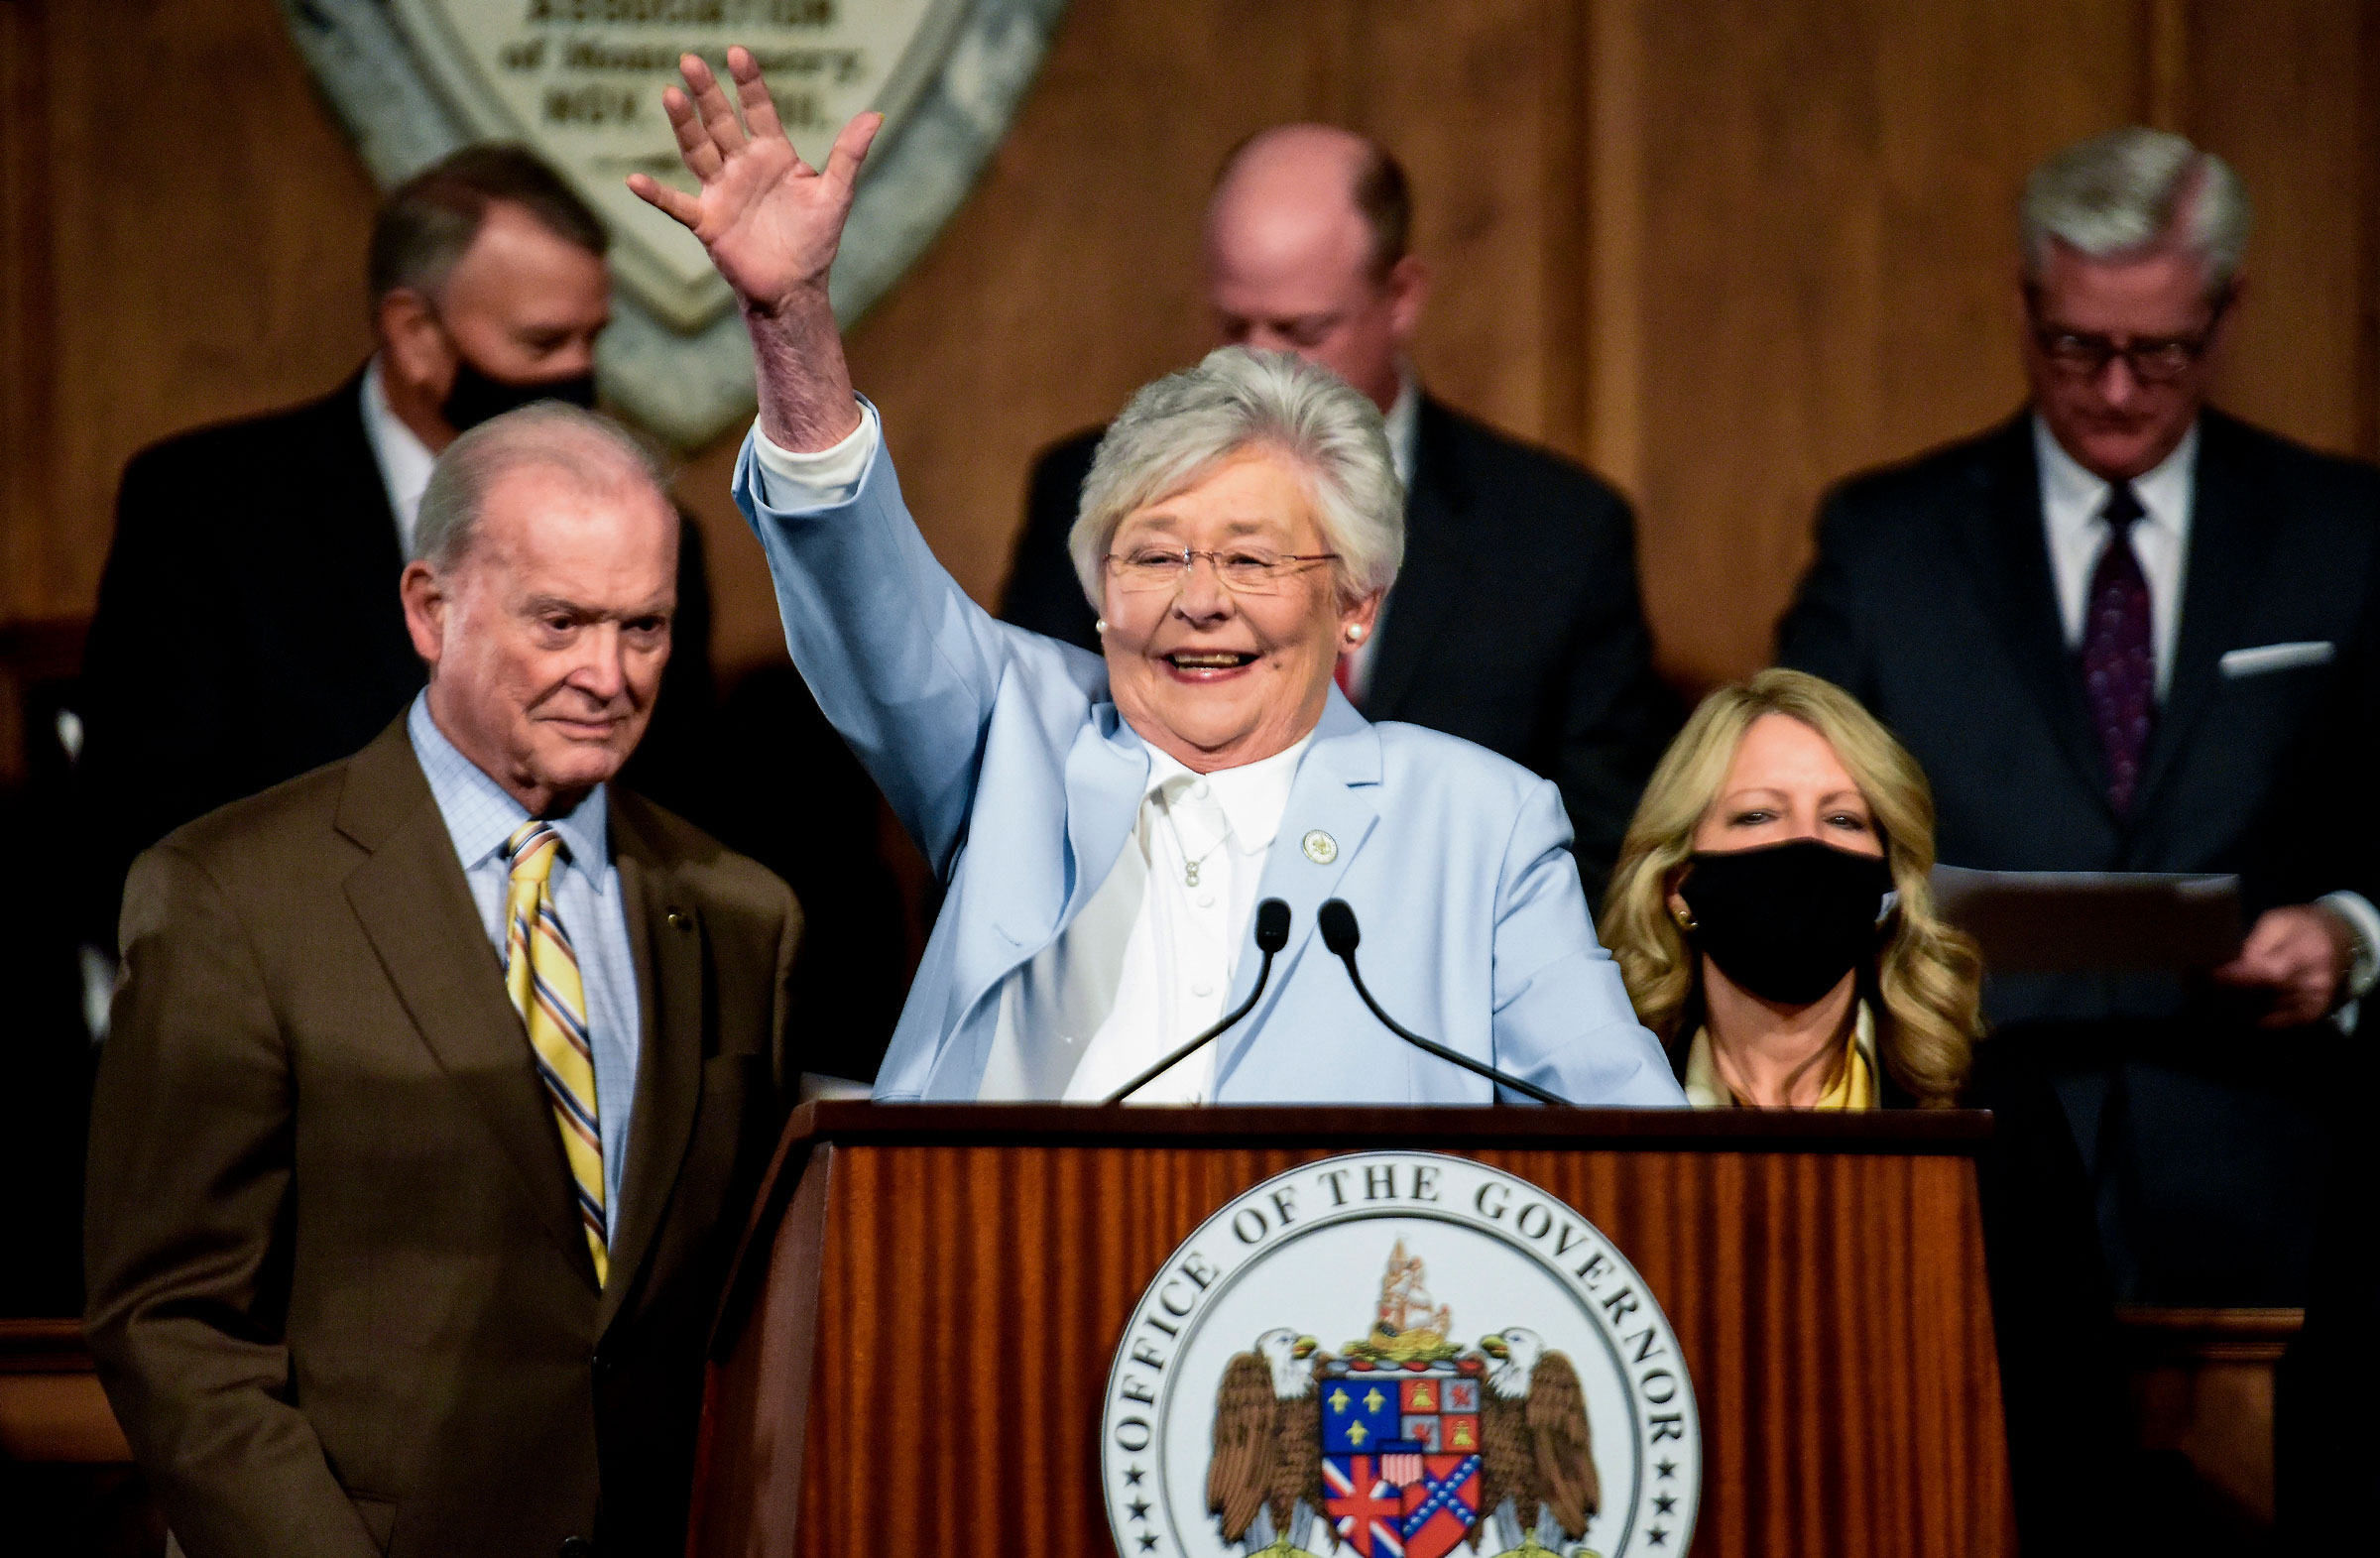 Alabama Gov. Kay Ivey waves as she arrives to deliver her State of the State address at the State Capitol Building in Montgomery, Ala., Jan. 11, 2022. (Mickey Welsh—The Montgomery Advertiser/AP)